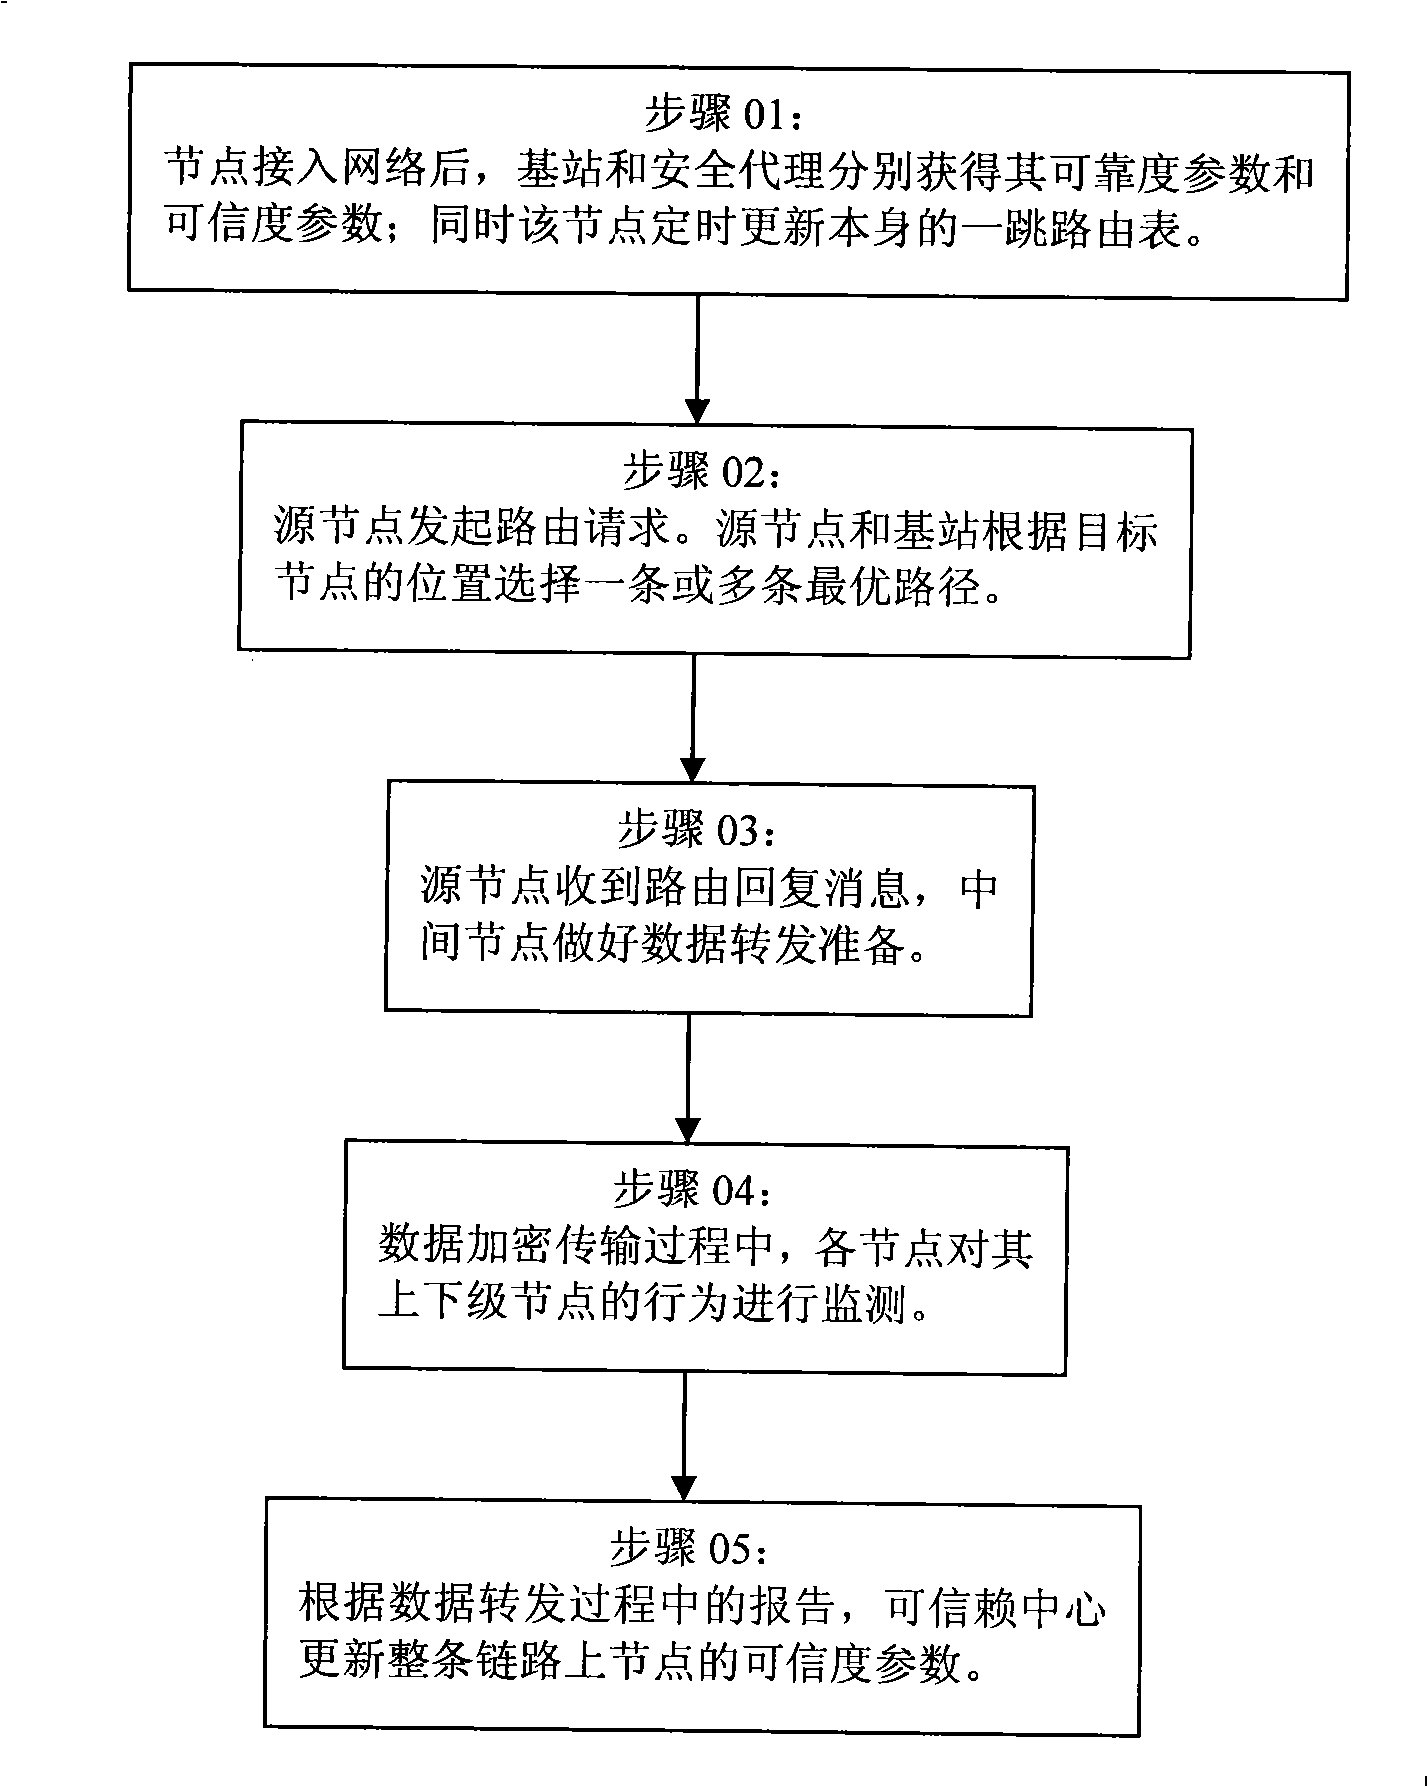 Safety routing method for amalgamation network of honeycomb network and self-organization network with enhanced security